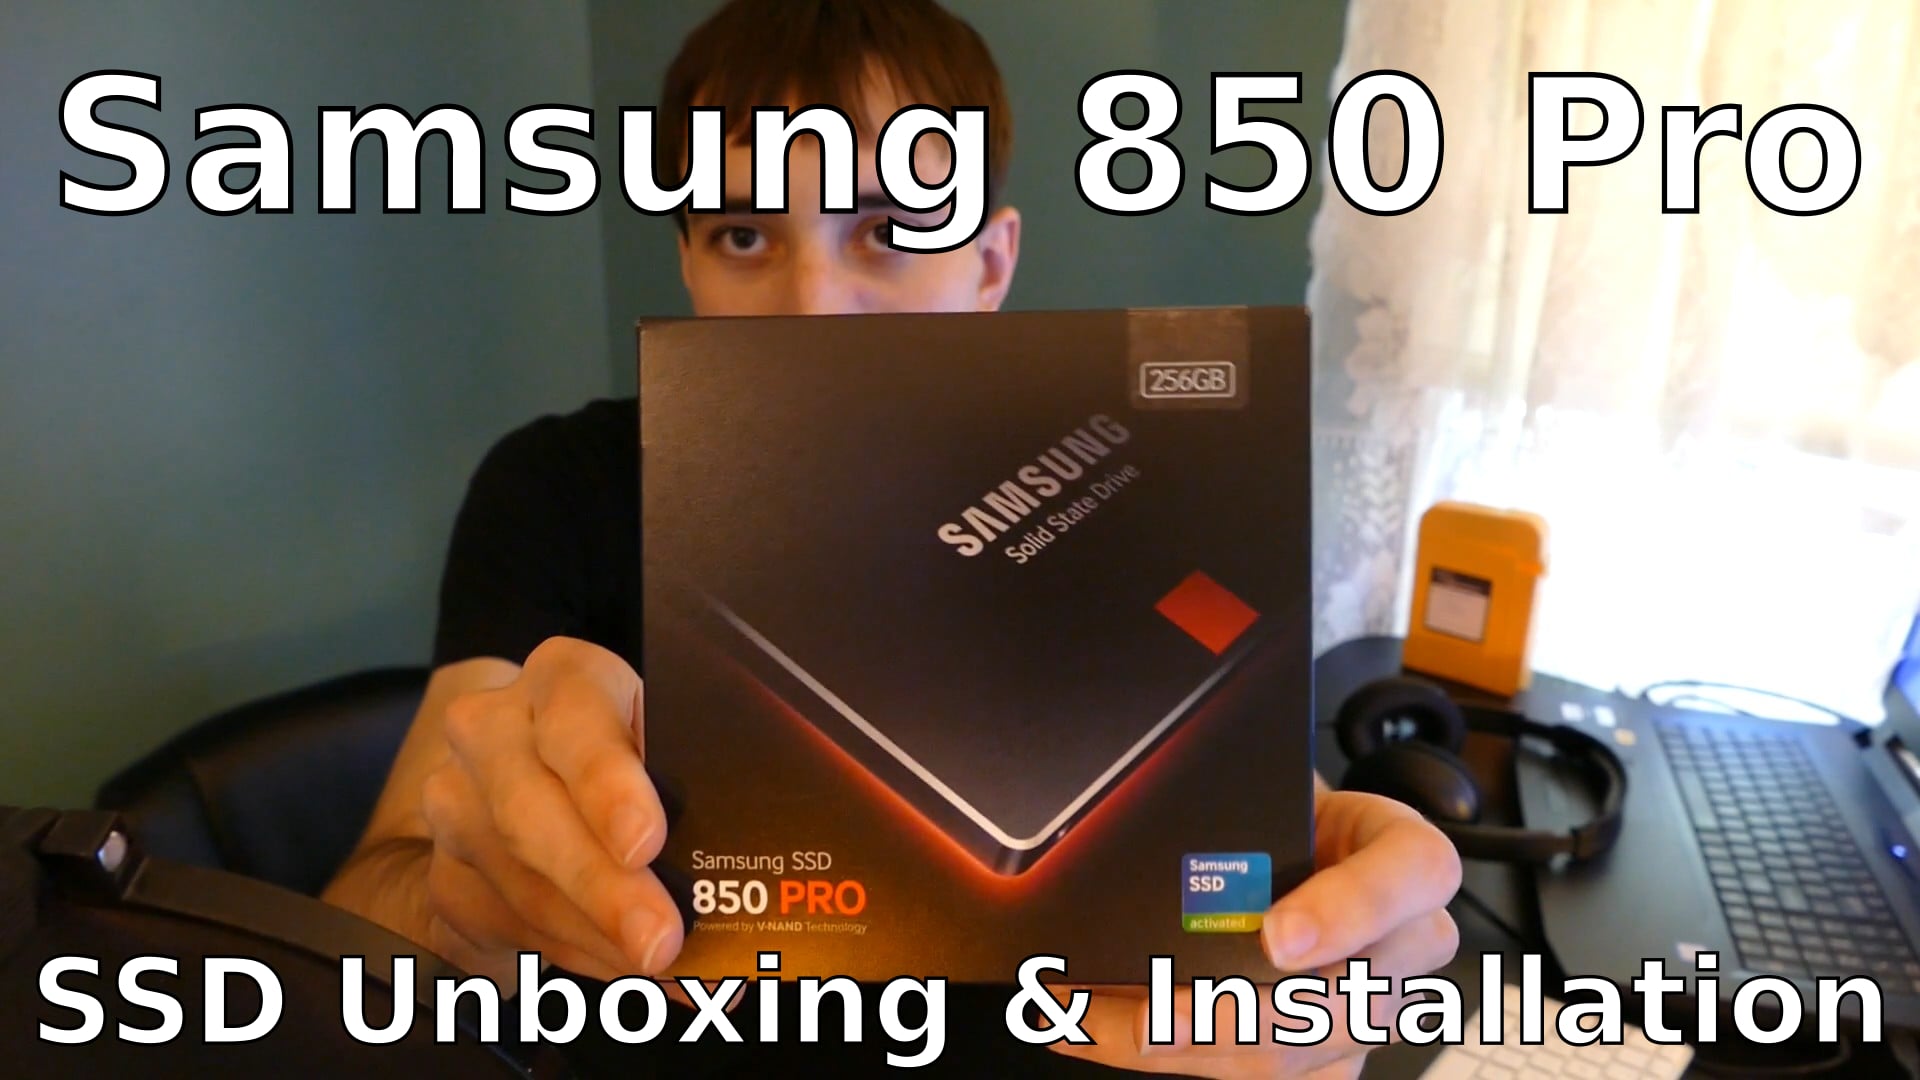 Samsung 850 Pro SSD Unboxing & Installation